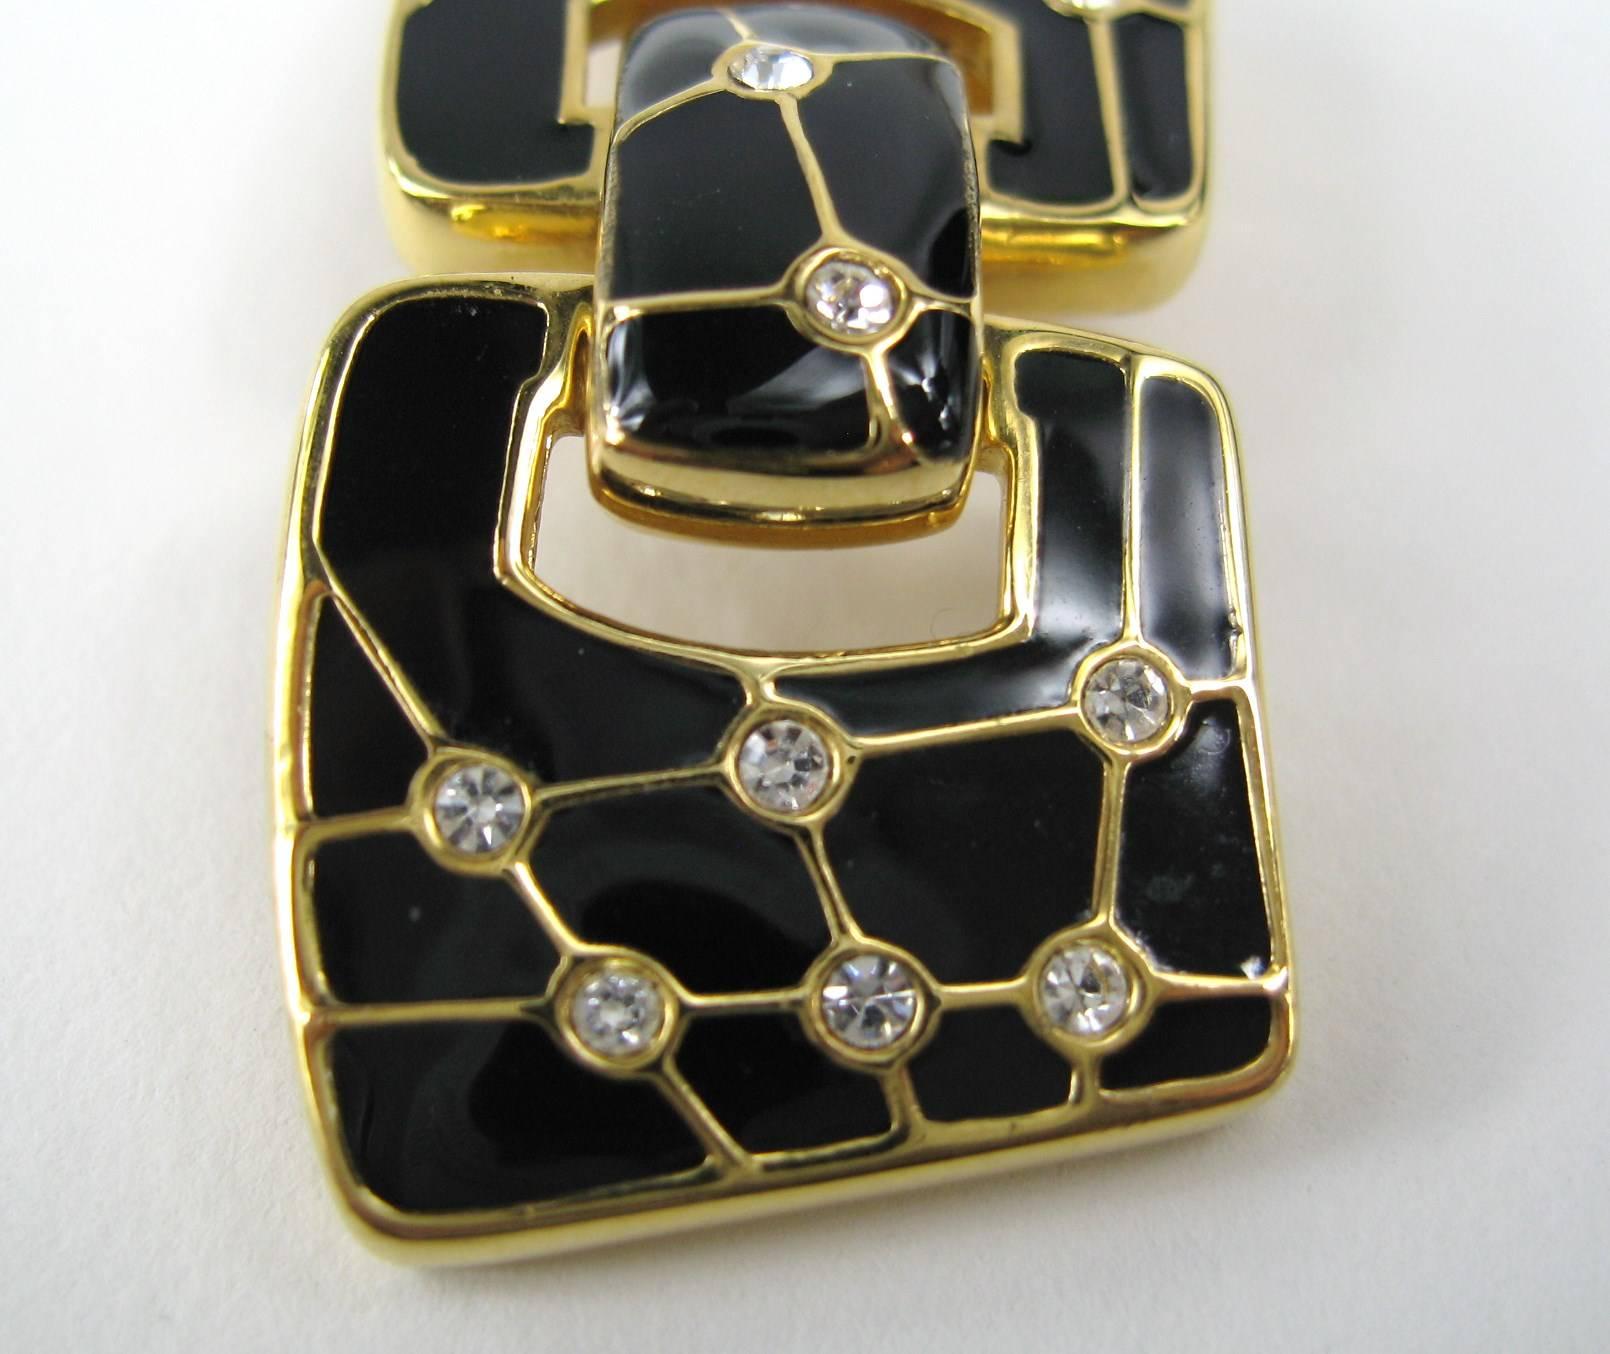 Black enameled Swarovski Enameled crystal dangle Clip on  earrings Measuring  1.70 in x .70 in. This is out of a massive collection of Hopi, Zuni, Navajo, Southwestern, sterling silver, costume jewelry and fine jewelry from one collector. Be sure to